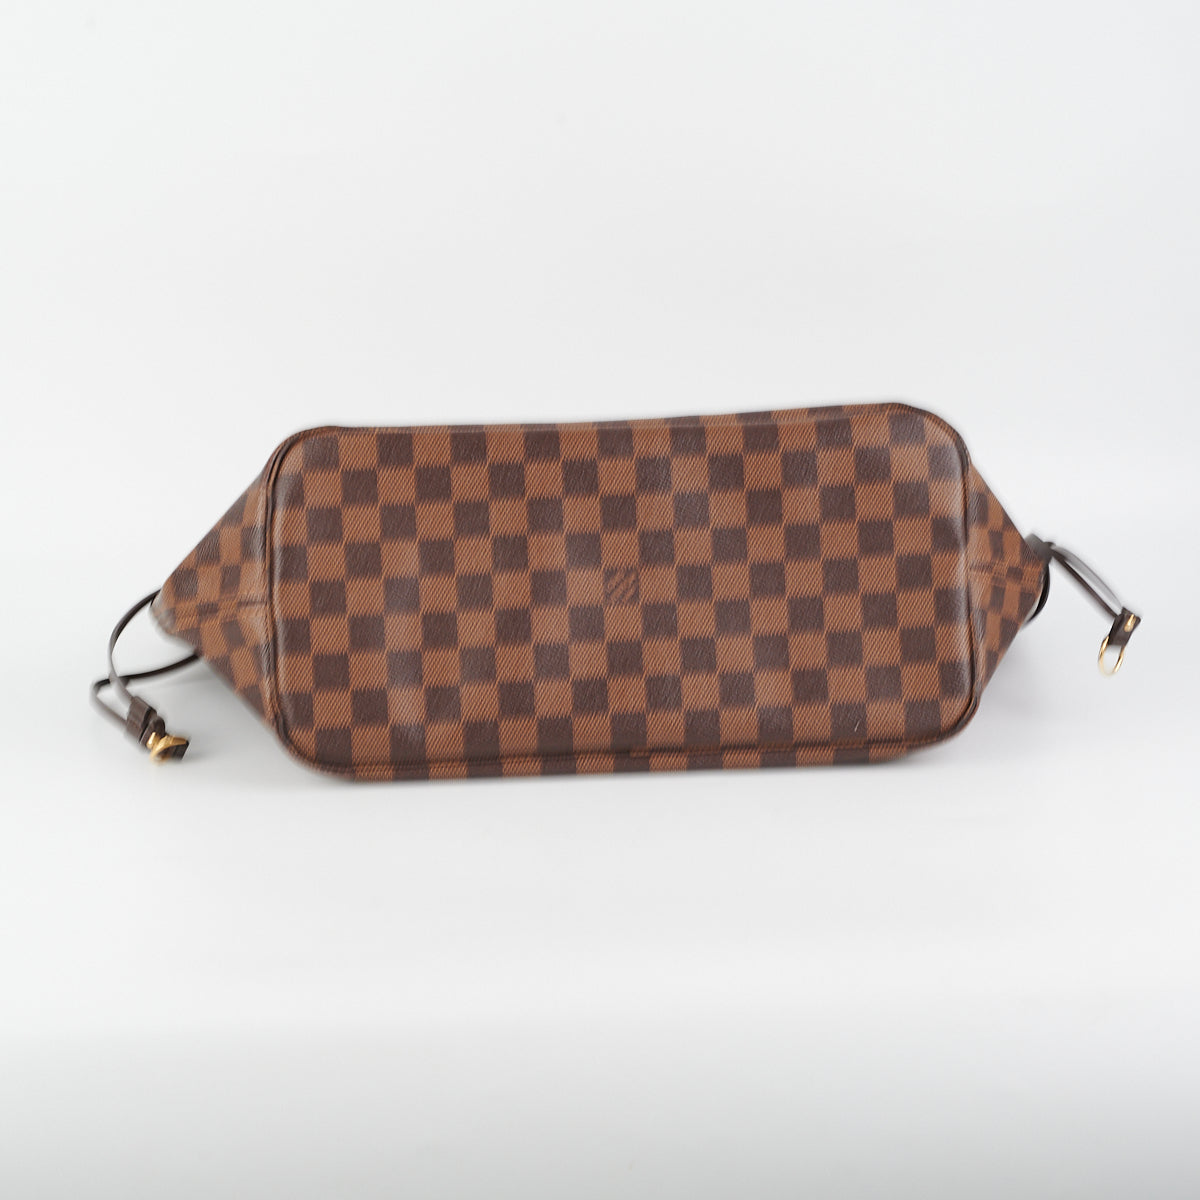 Louis Vuitton Brooklyn MM in damier ebene – Lady Clara's Collection